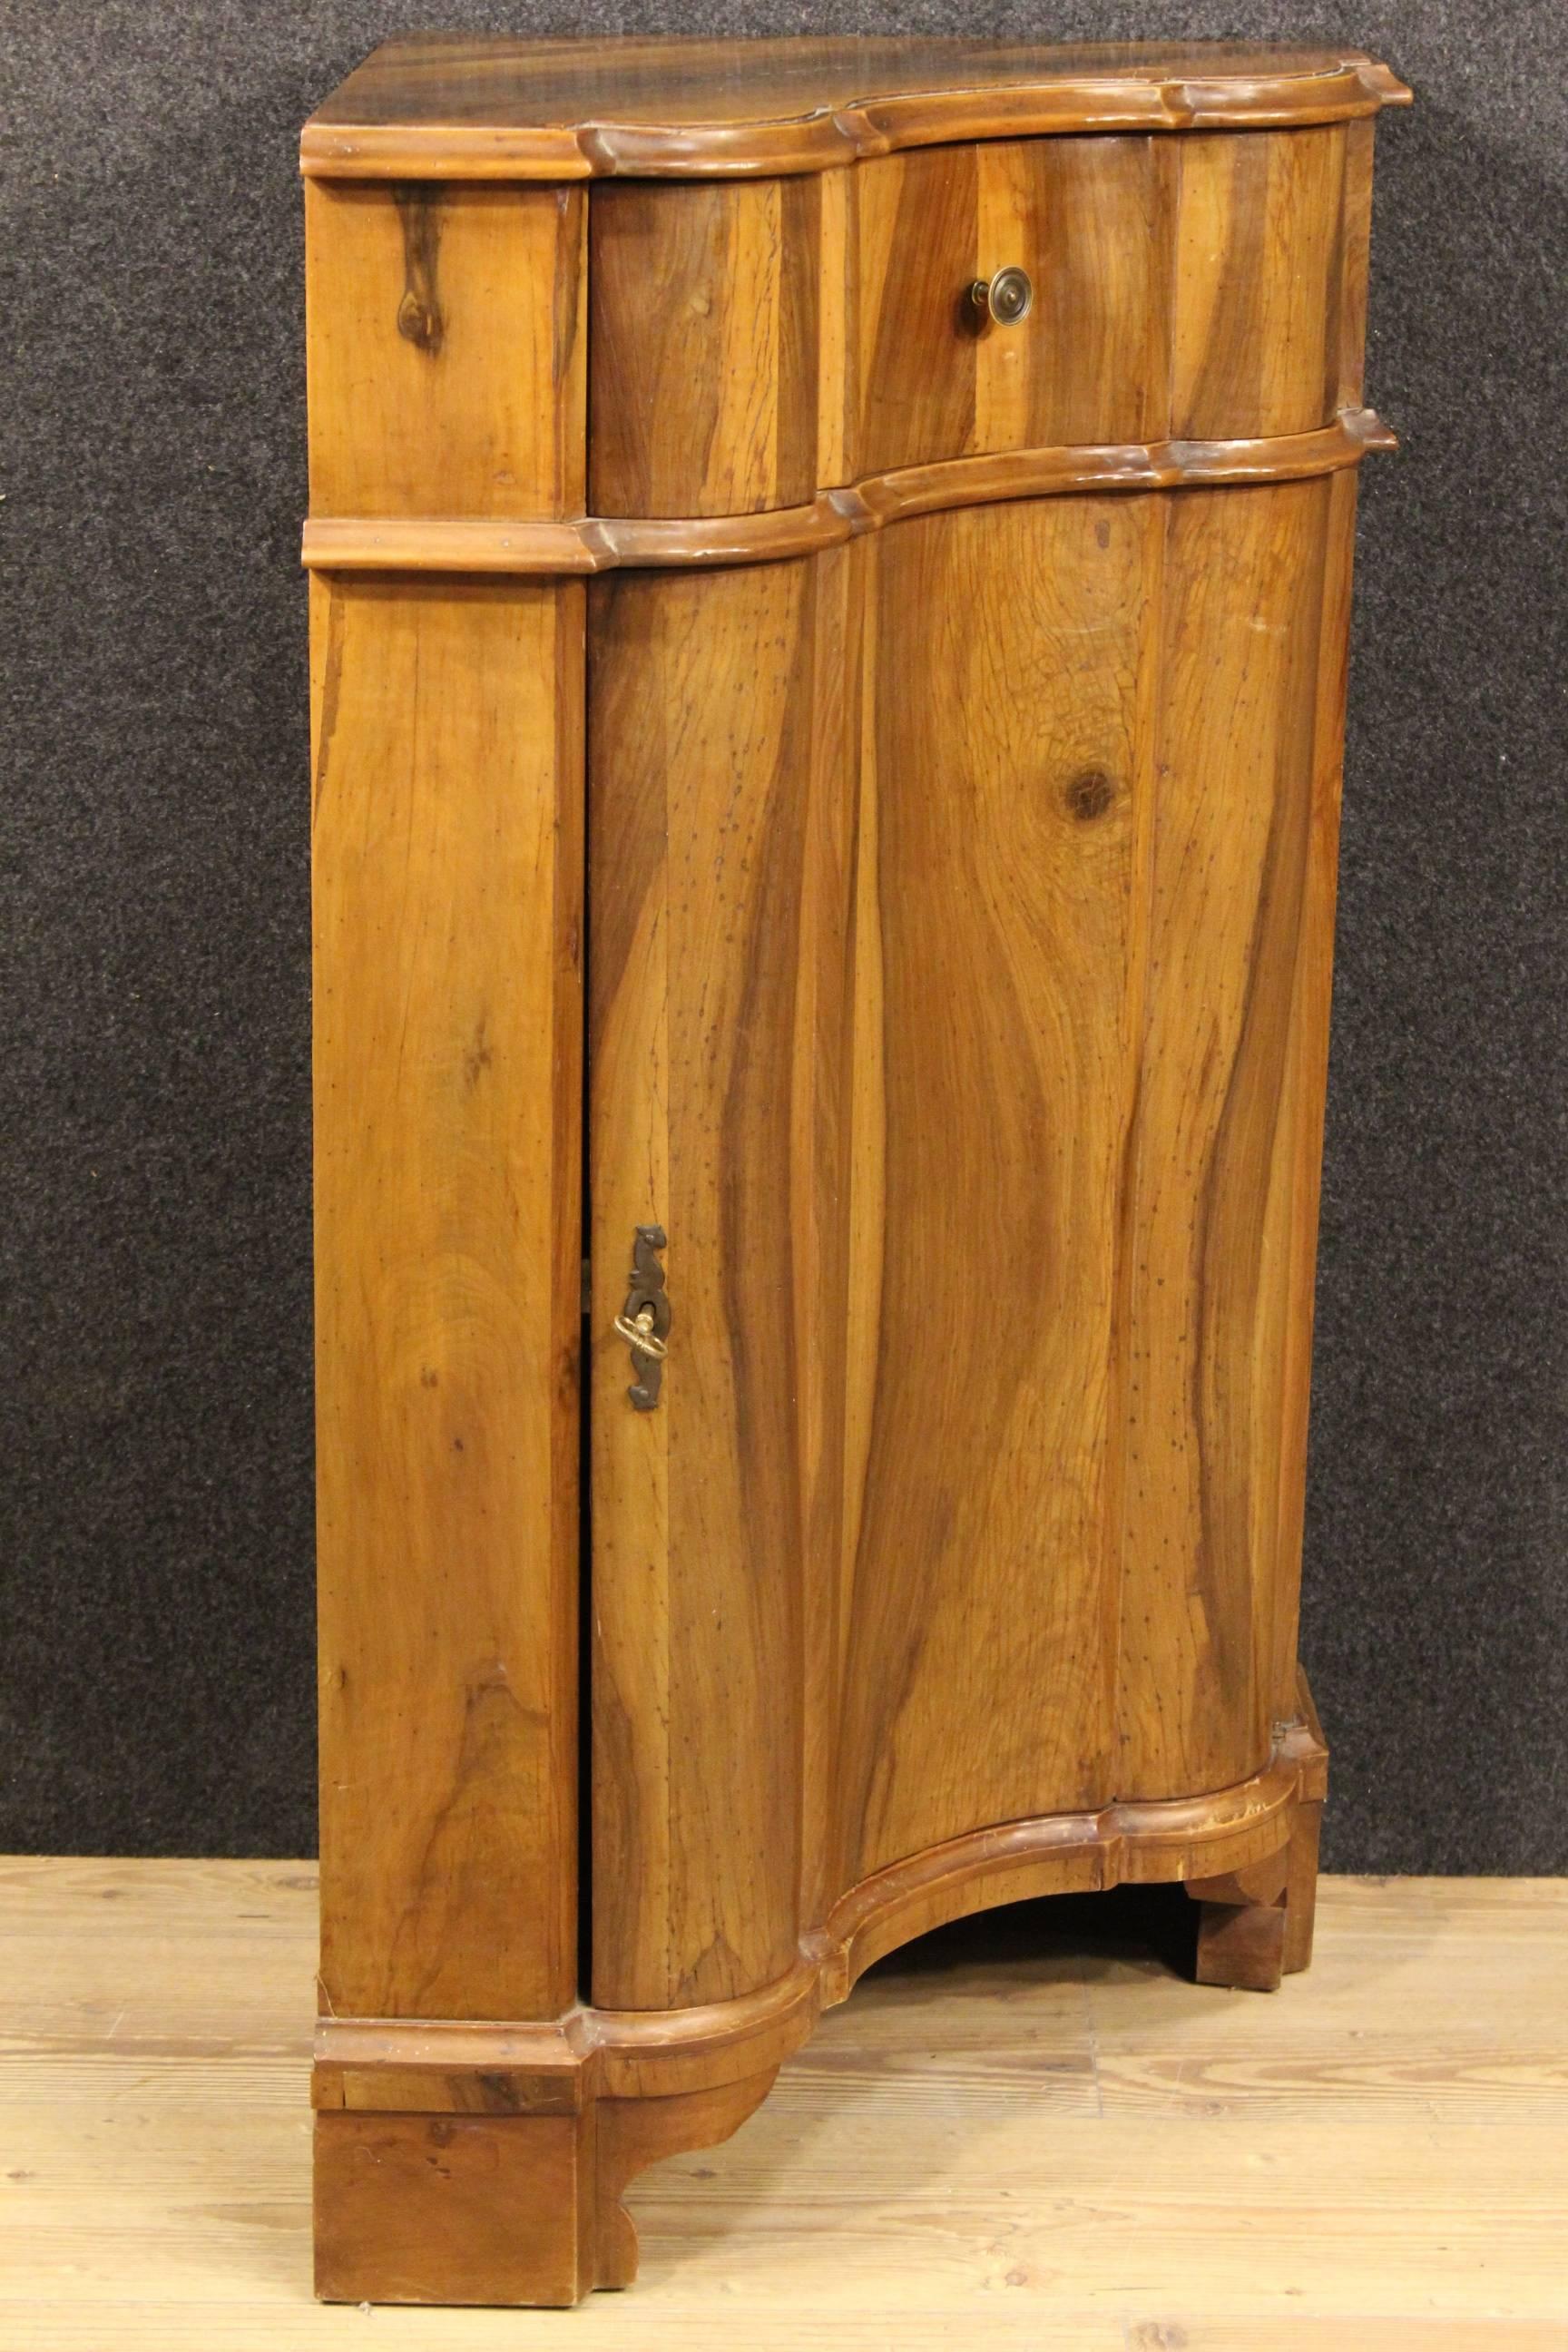 Corner cupboard made by carved walnut. Italian furniture of the 20th century hard to find. Cupboard with one door with an internal shelf and a top drawer of great service. Corner cupboard supported by three legs, of good stability. It shows some